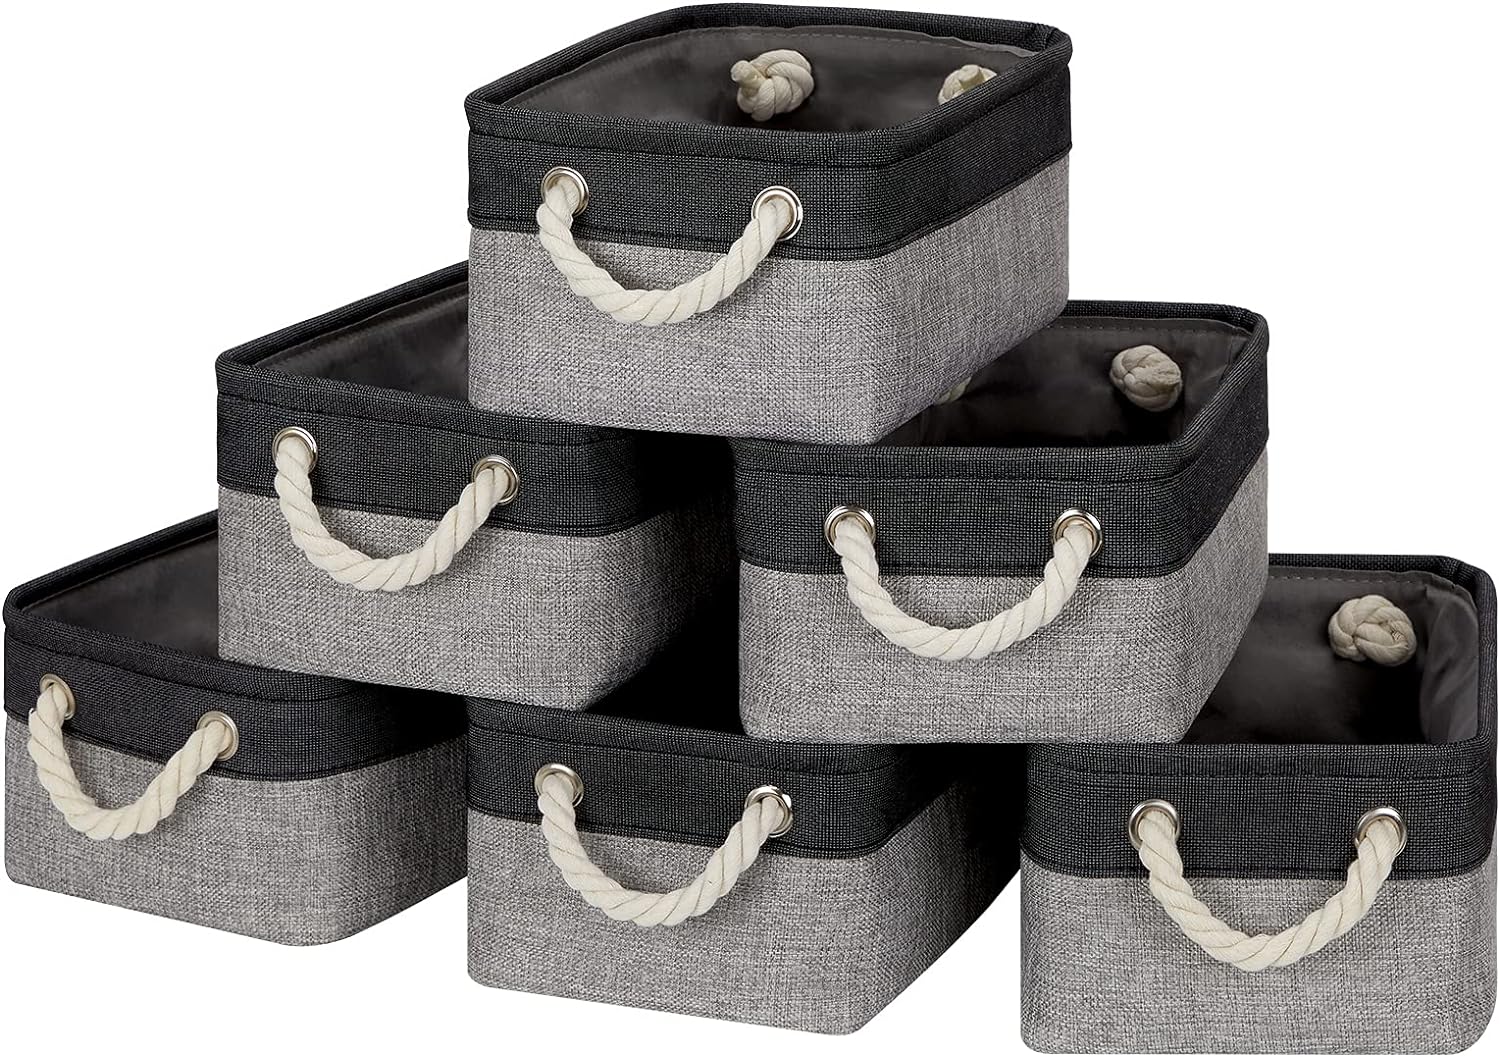 Temary Fabric Storage Baskets 6 Pcs Small Cloth Basket for Shelves Collapsible Decorative Storage Organizer Small Canvas Storage Bins with Handles for Nursery, Home(Black,11.8L x 7.9W x 5.3H inches)